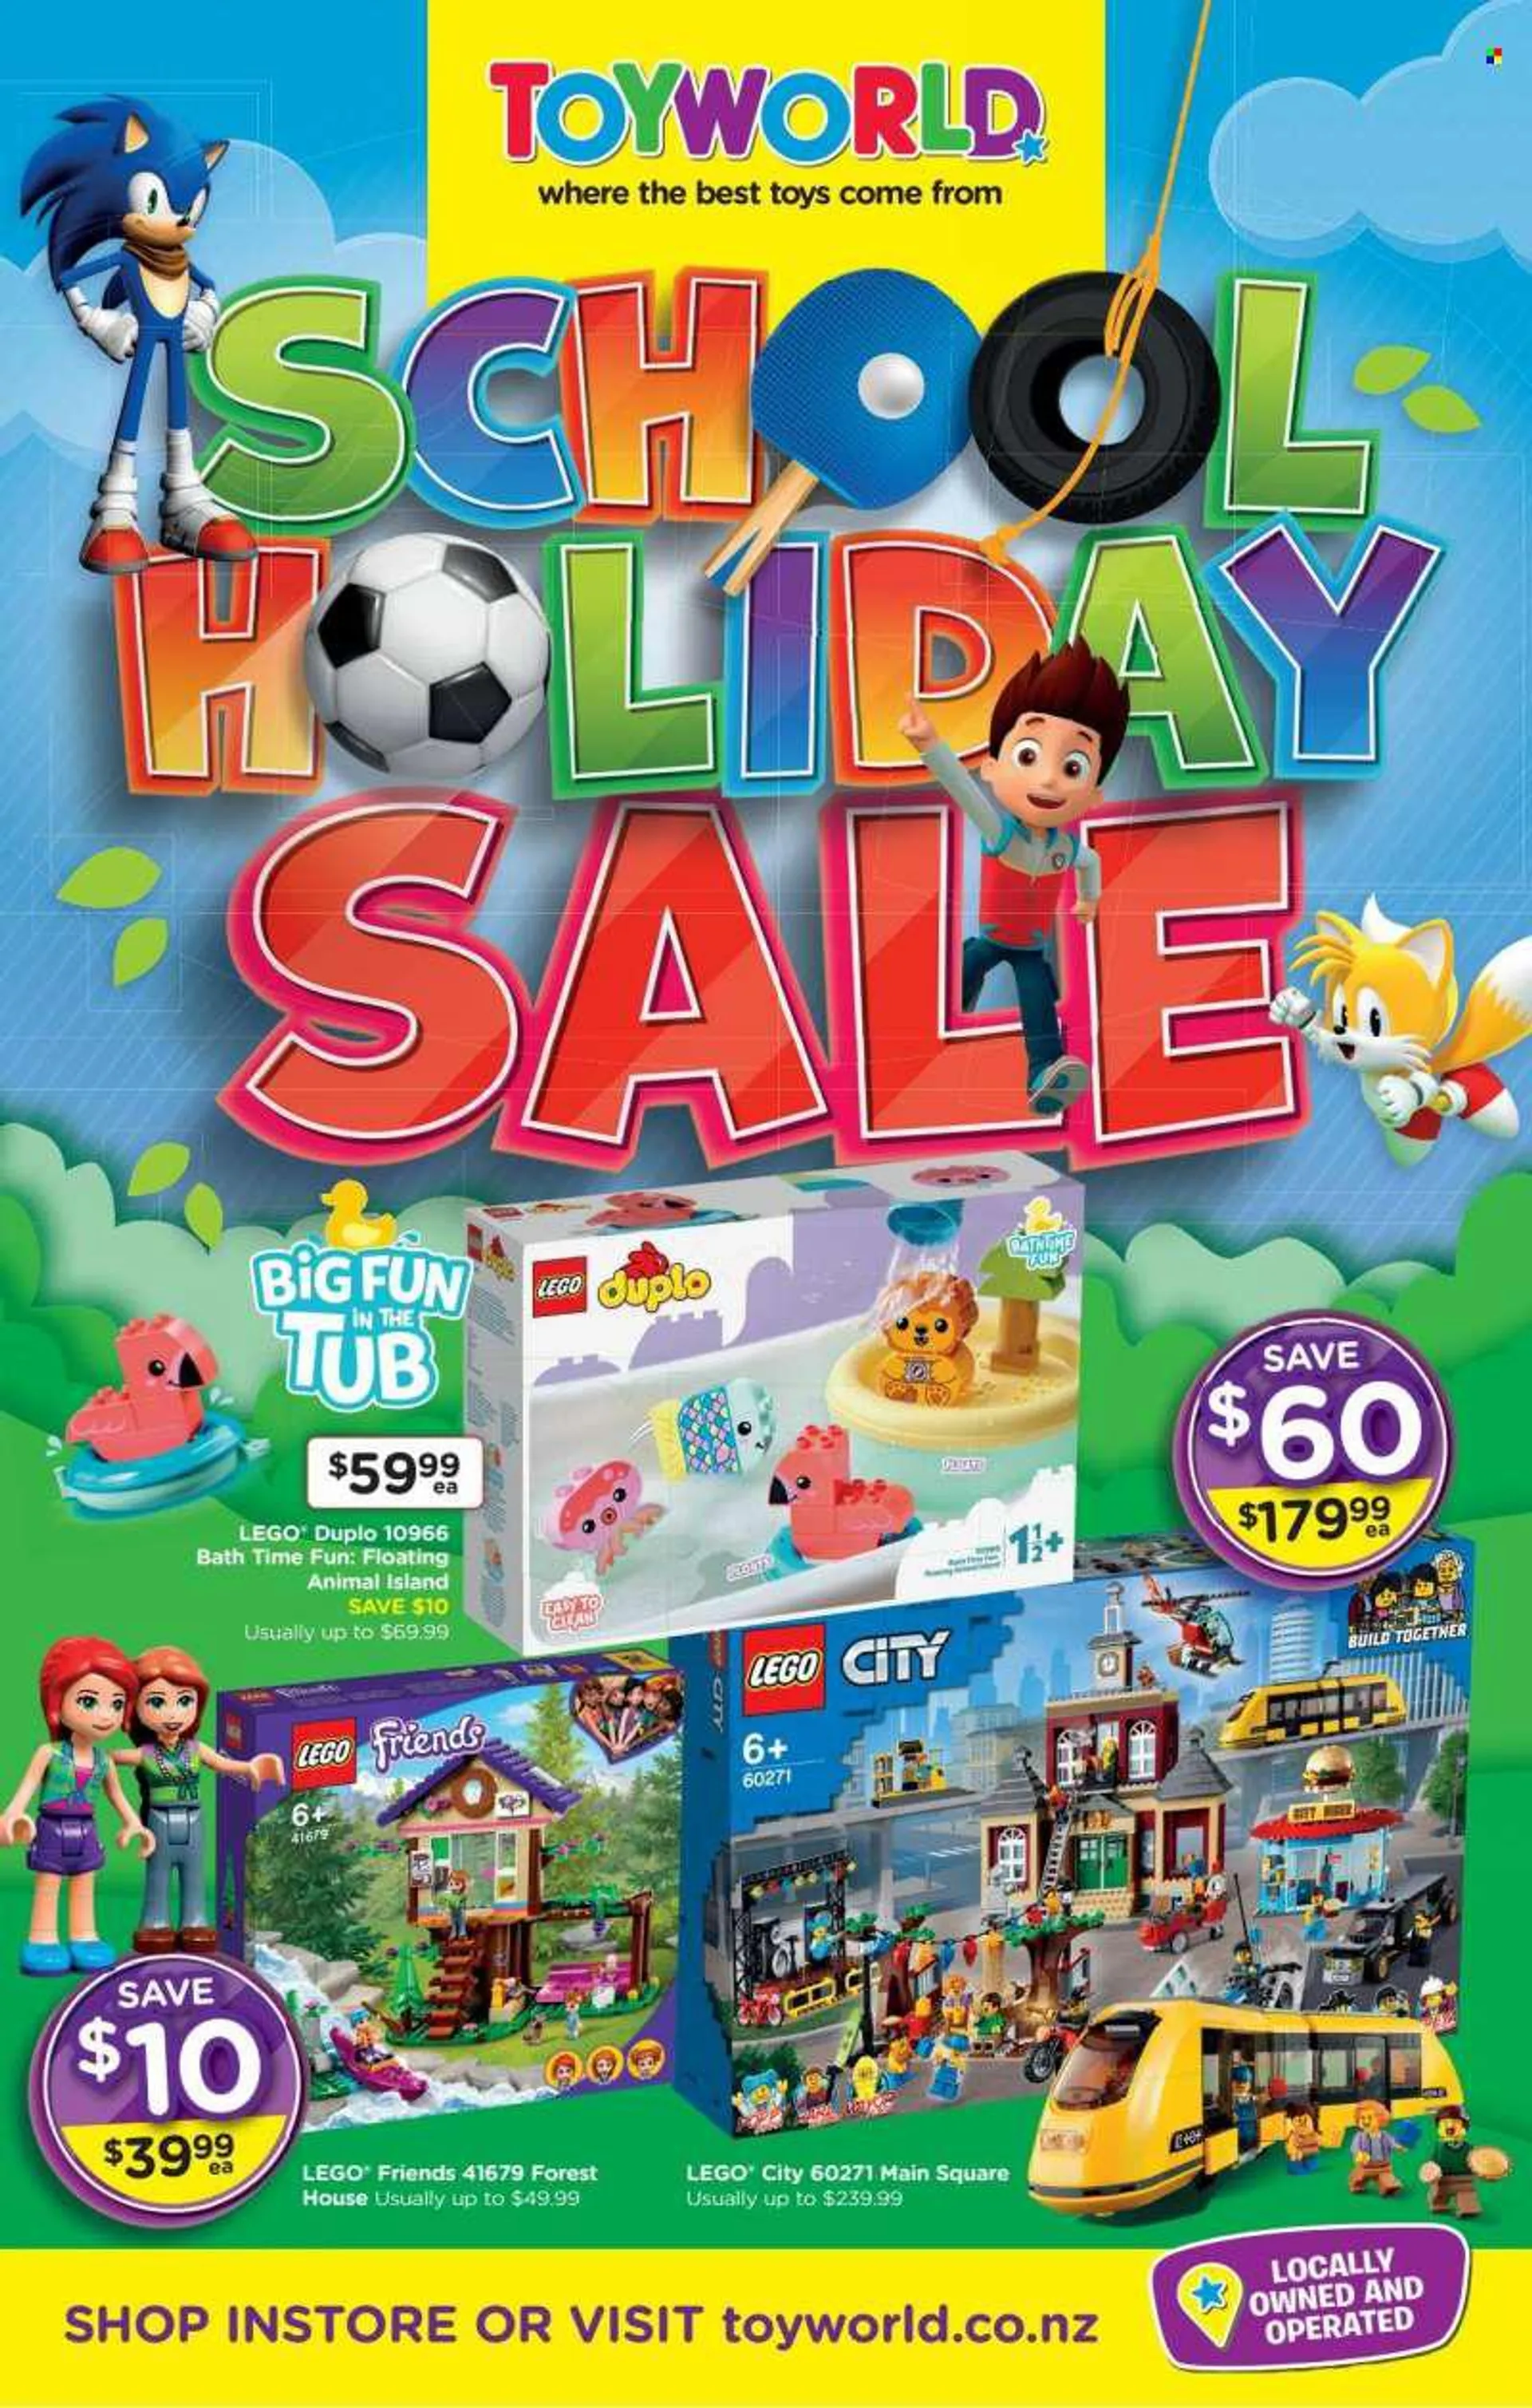 Toyworld mailer - 13.04.2022 - 01.05.2022. - 13 April 1 May 2022 - Page 1